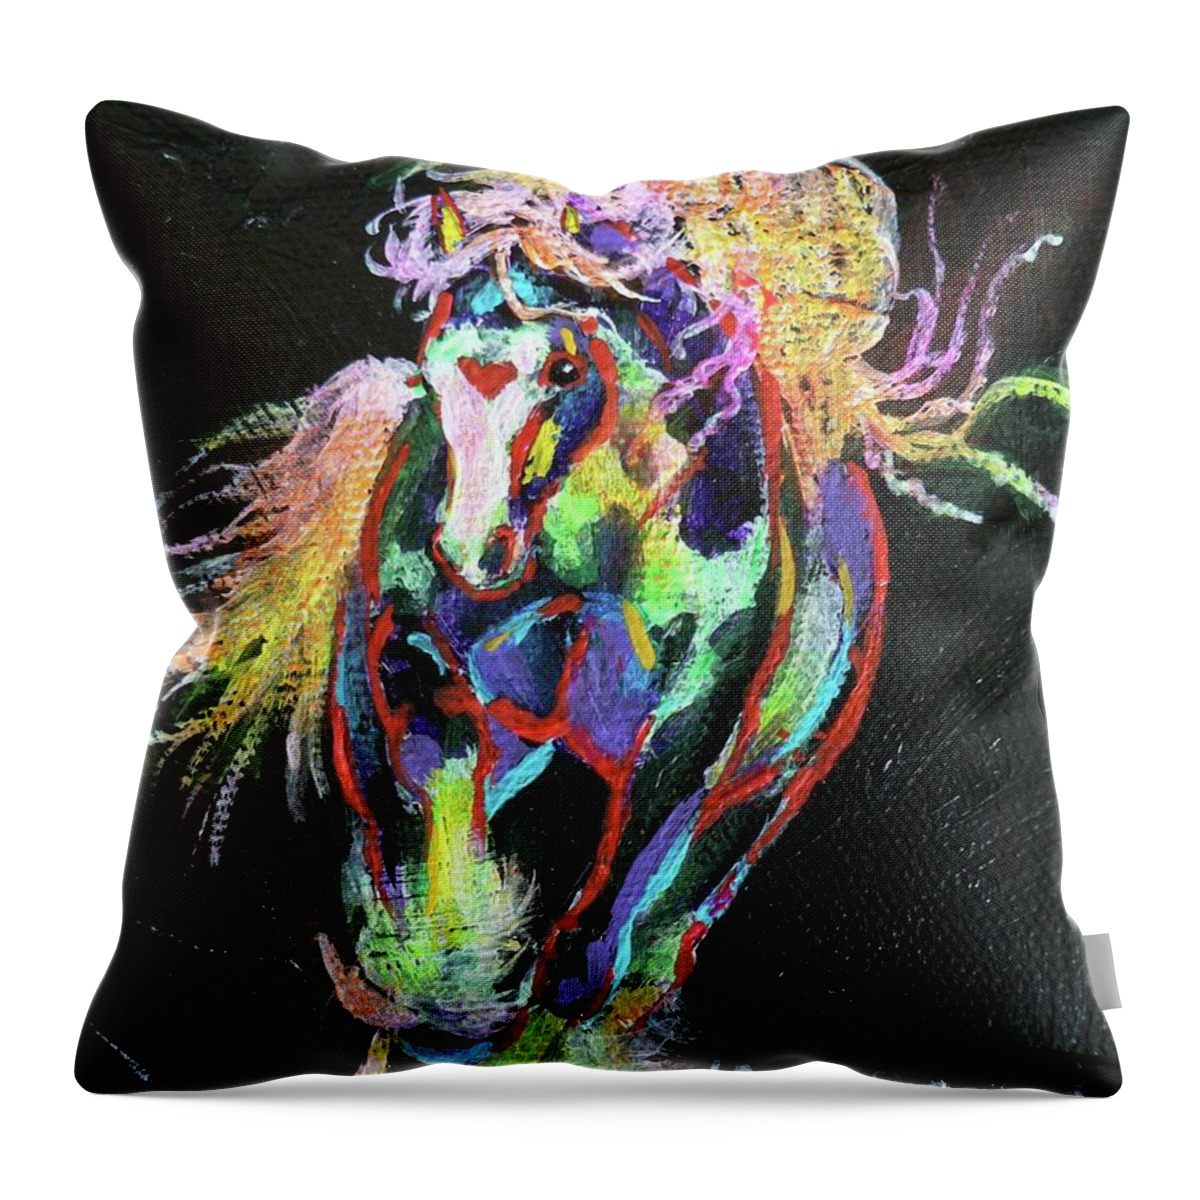 Gypsy Cob Throw Pillow featuring the painting Wraggle Taggle Gypsy Cob by Louise Green